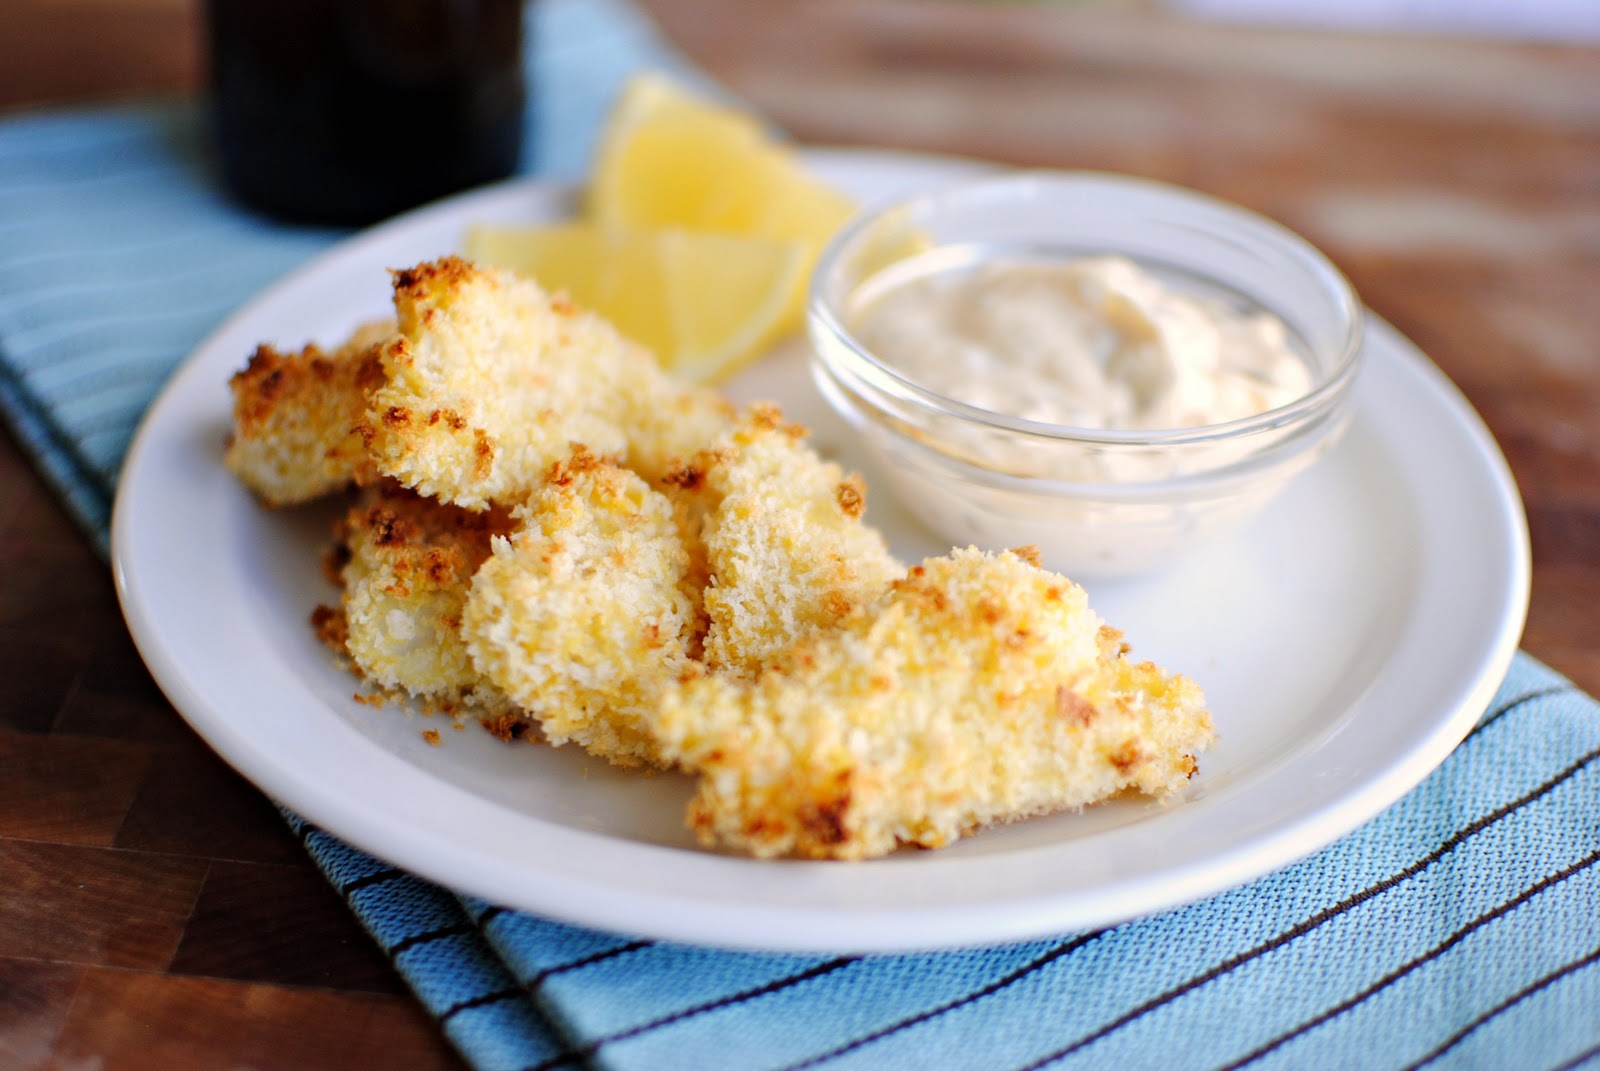 Crispy Baked Fish Nuggets with homemade Tartar Sauce - Simply Scratch